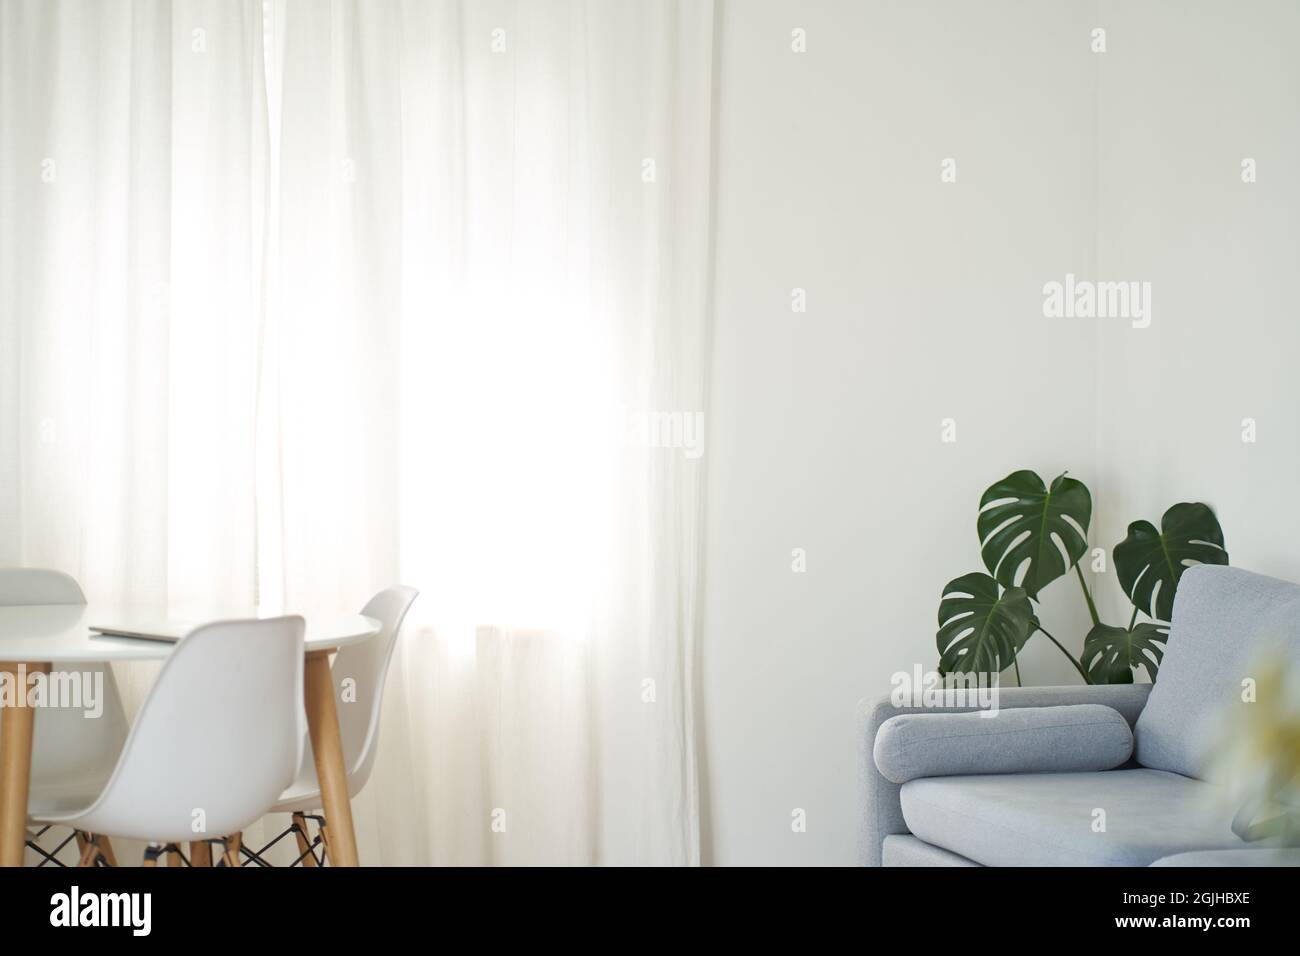 Stylish interior of the dining room with a designer white table, chairs, a plant in the corner, a large window, the concept of modern home decor. High quality photo Stock Photo